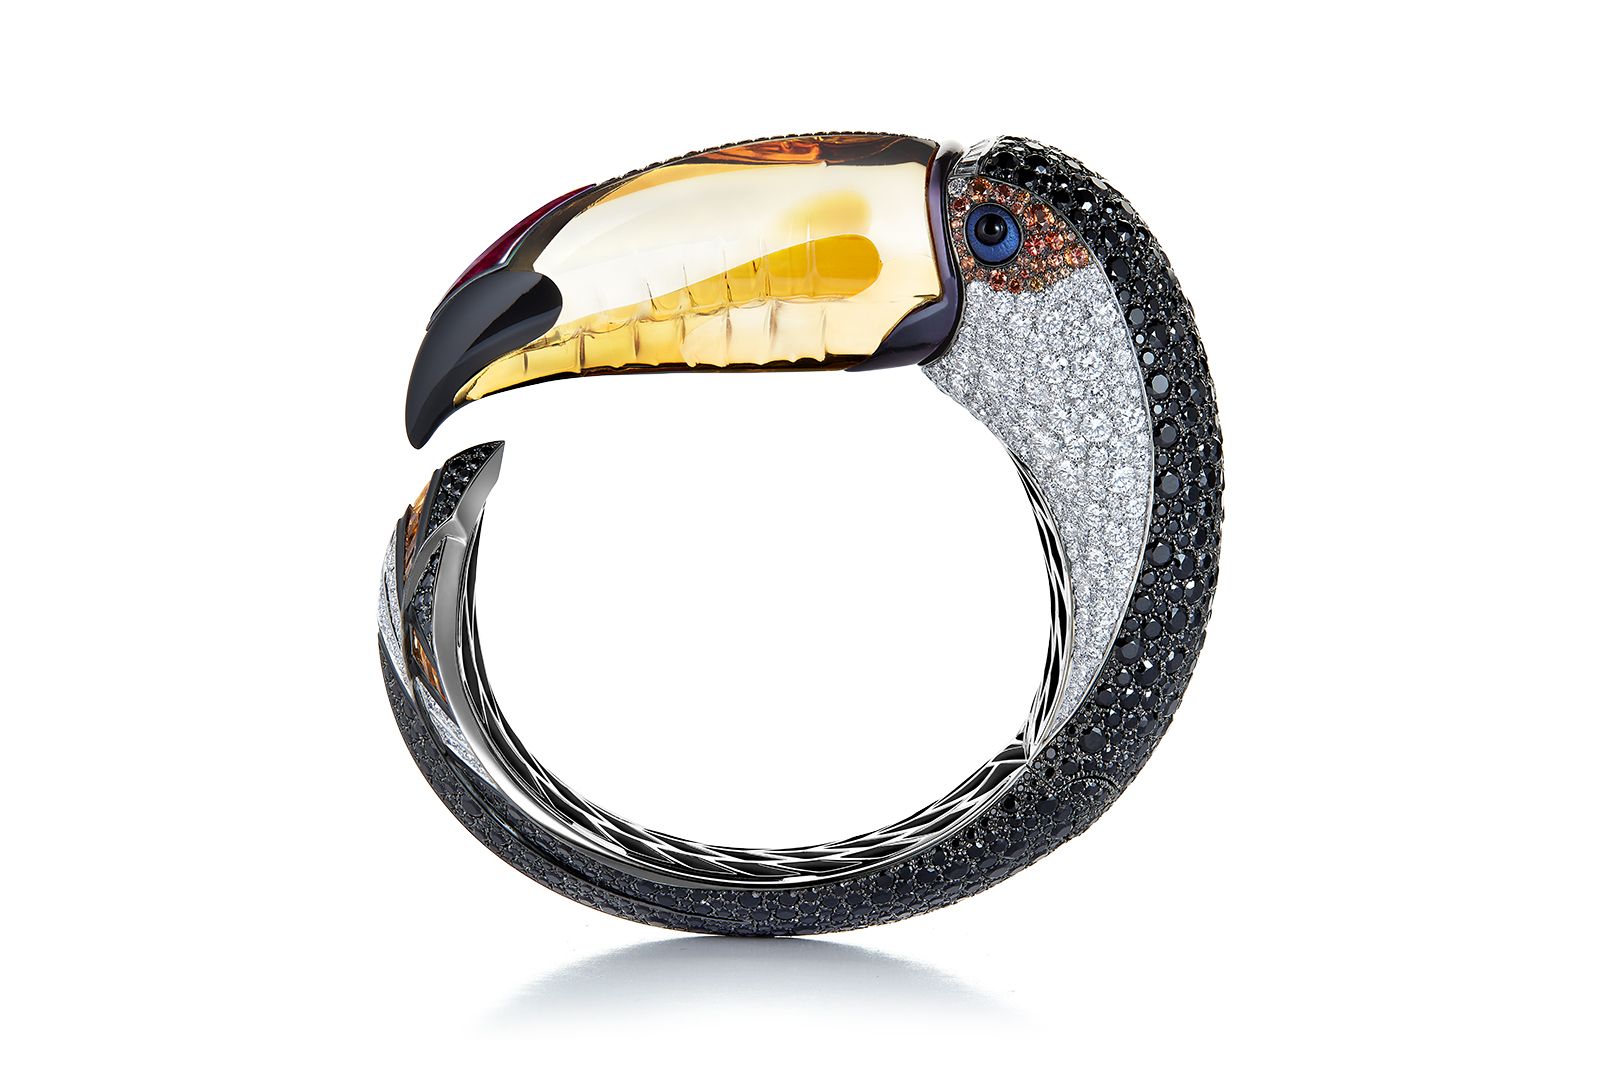 Boucheron citrine, rubellite, spinel and titanium Toucan bracelet from the Carte Blanche Ailleurs High Jewellery collection